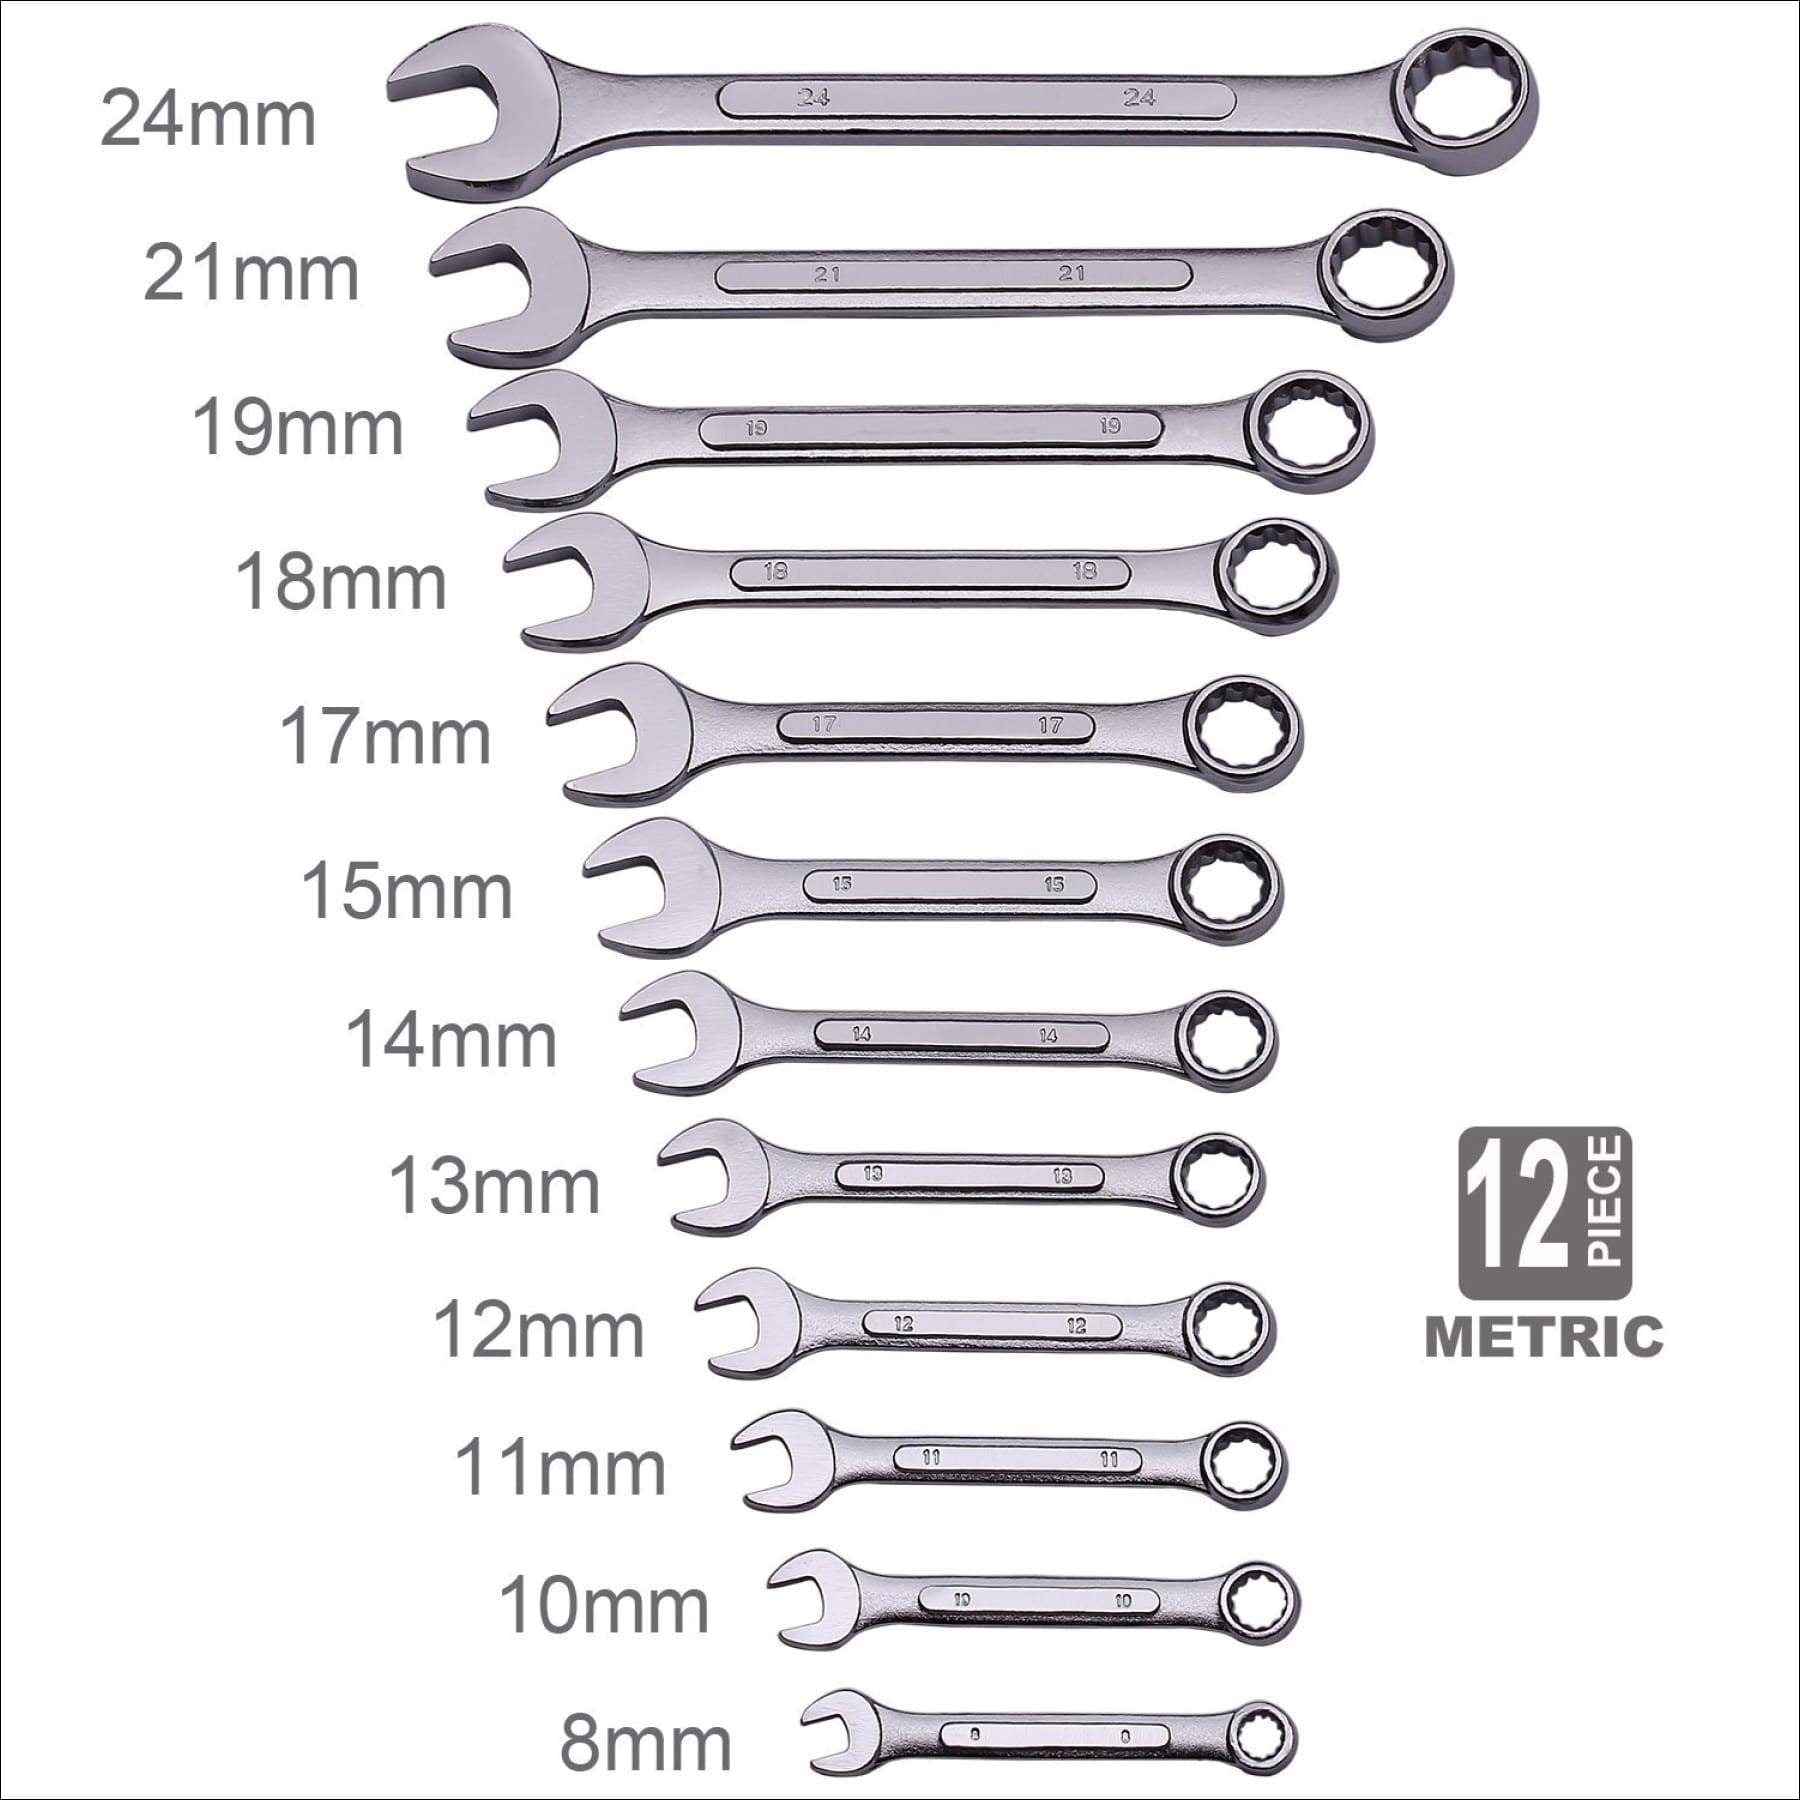 Last Chance Archery ReachIt Wrench 24 in 1 Tool Set